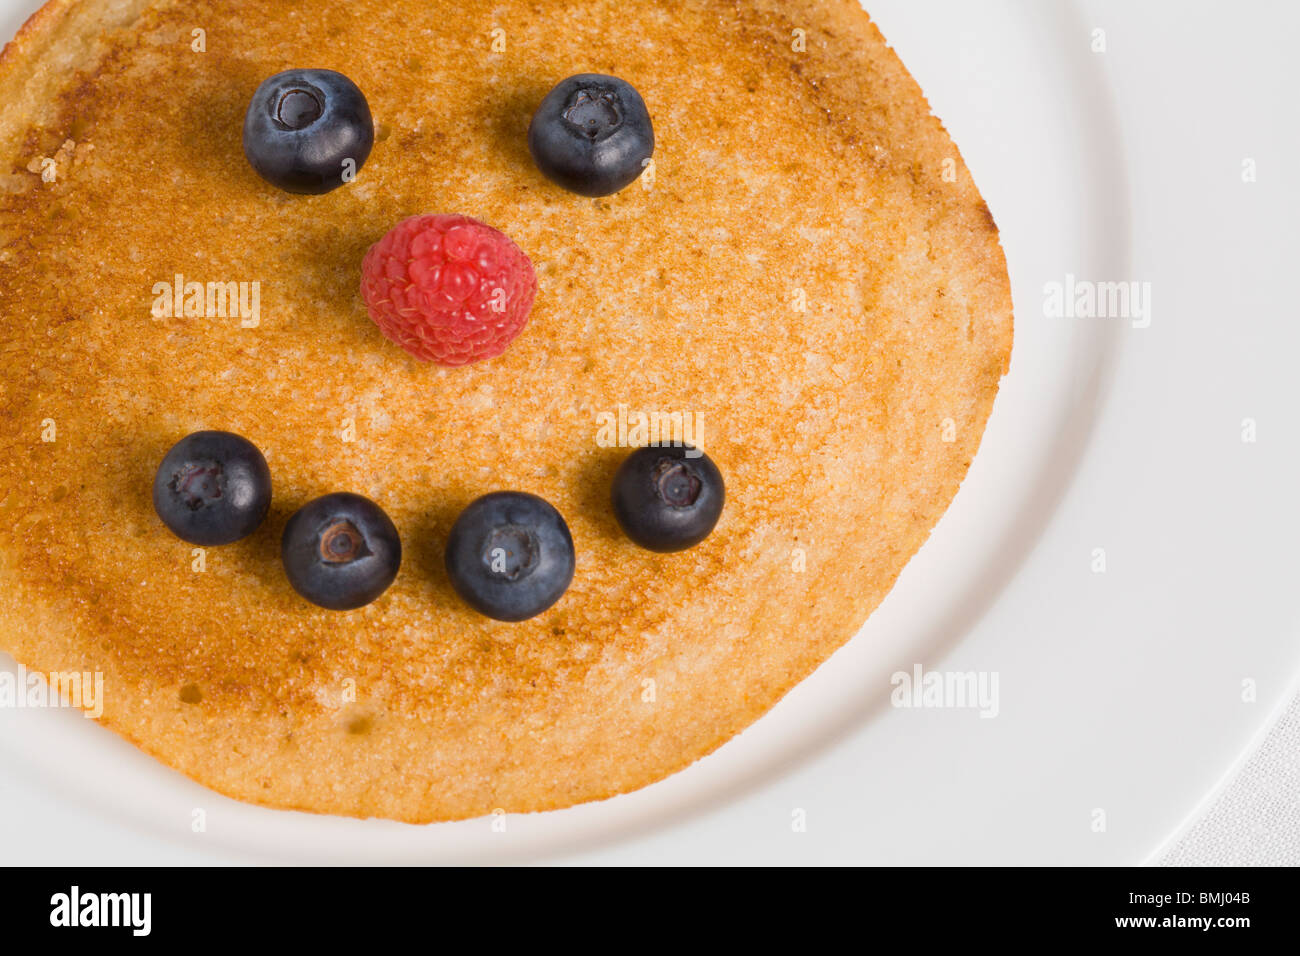 Pancake with smiley face made from blueberries and raspberry Stock Photo